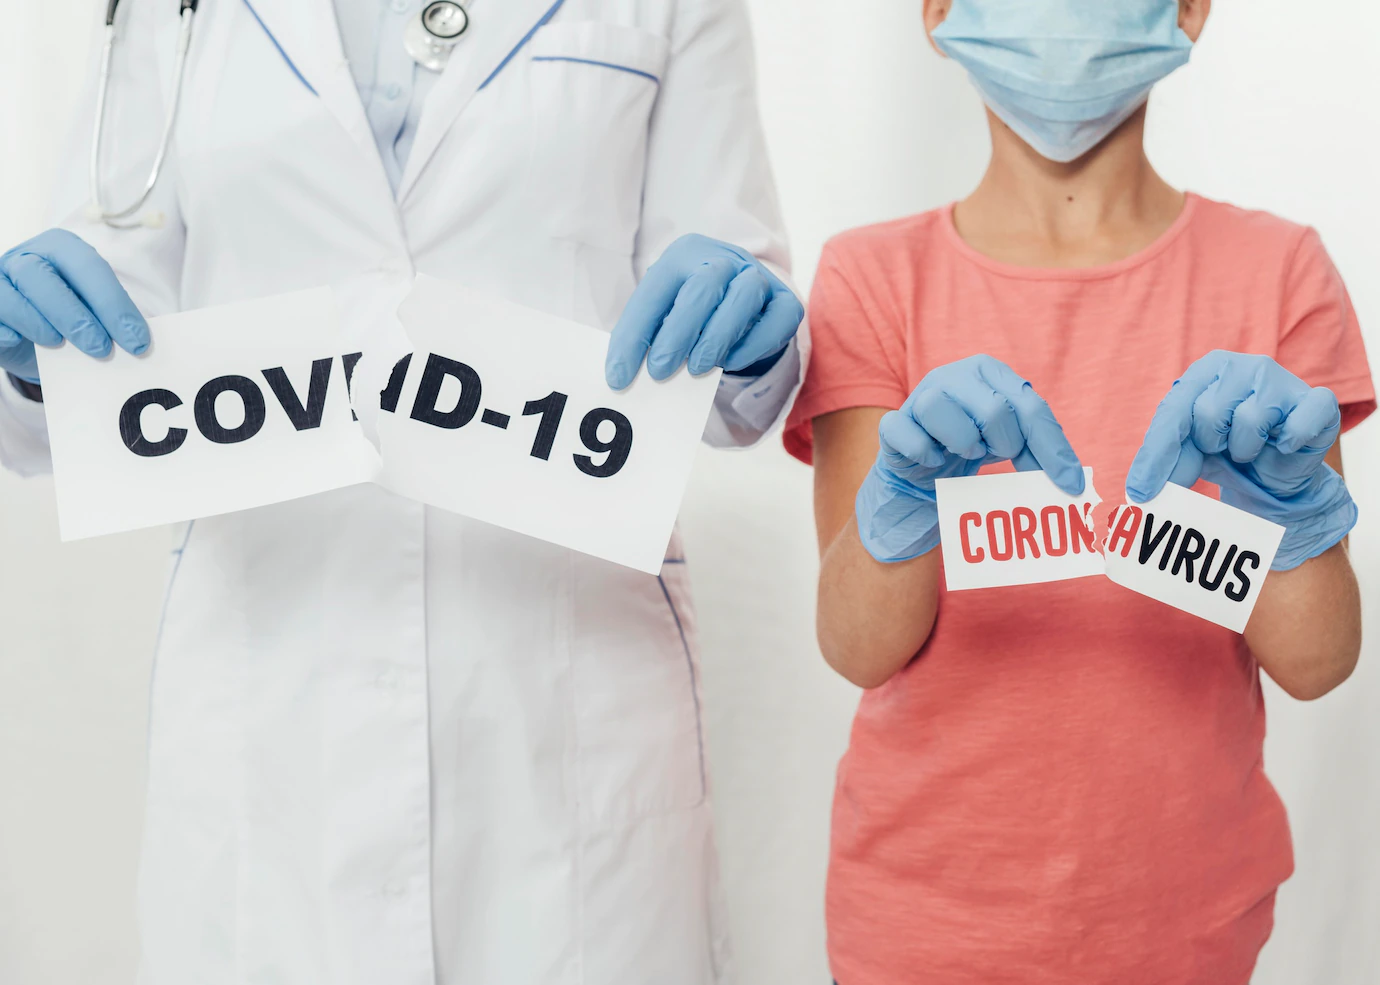 Are you worried about health during Covid-19? Follow these 5 Ways